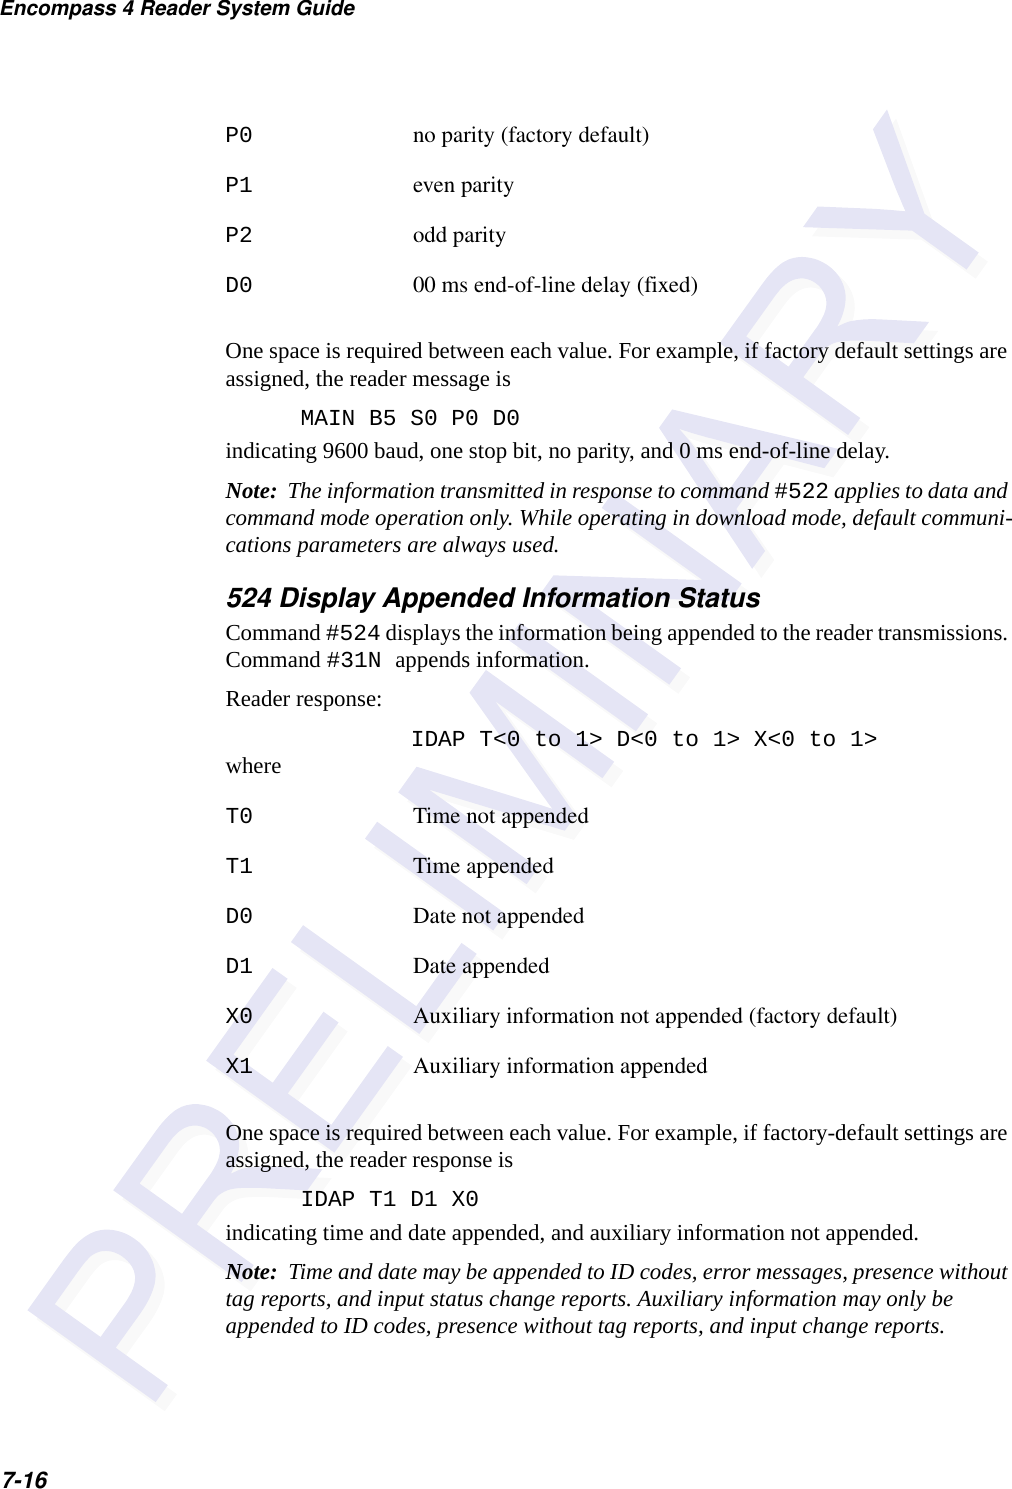 Encompass 4 Reader System Guide7-16P0 no parity (factory default)P1 even parityP2 odd parityD0 00 ms end-of-line delay (fixed)One space is required between each value. For example, if factory default settings are assigned, the reader message isMAIN B5 S0 P0 D0indicating 9600 baud, one stop bit, no parity, and 0 ms end-of-line delay.Note:  The information transmitted in response to command #522 applies to data and command mode operation only. While operating in download mode, default communi-cations parameters are always used.524 Display Appended Information StatusCommand #524 displays the information being appended to the reader transmissions. Command #31N appends information.Reader response:IDAP T&lt;0 to 1&gt; D&lt;0 to 1&gt; X&lt;0 to 1&gt;whereT0 Time not appendedT1 Time appendedD0 Date not appendedD1 Date appendedX0 Auxiliary information not appended (factory default)X1 Auxiliary information appendedOne space is required between each value. For example, if factory-default settings are assigned, the reader response isIDAP T1 D1 X0indicating time and date appended, and auxiliary information not appended.Note:  Time and date may be appended to ID codes, error messages, presence without tag reports, and input status change reports. Auxiliary information may only be appended to ID codes, presence without tag reports, and input change reports.